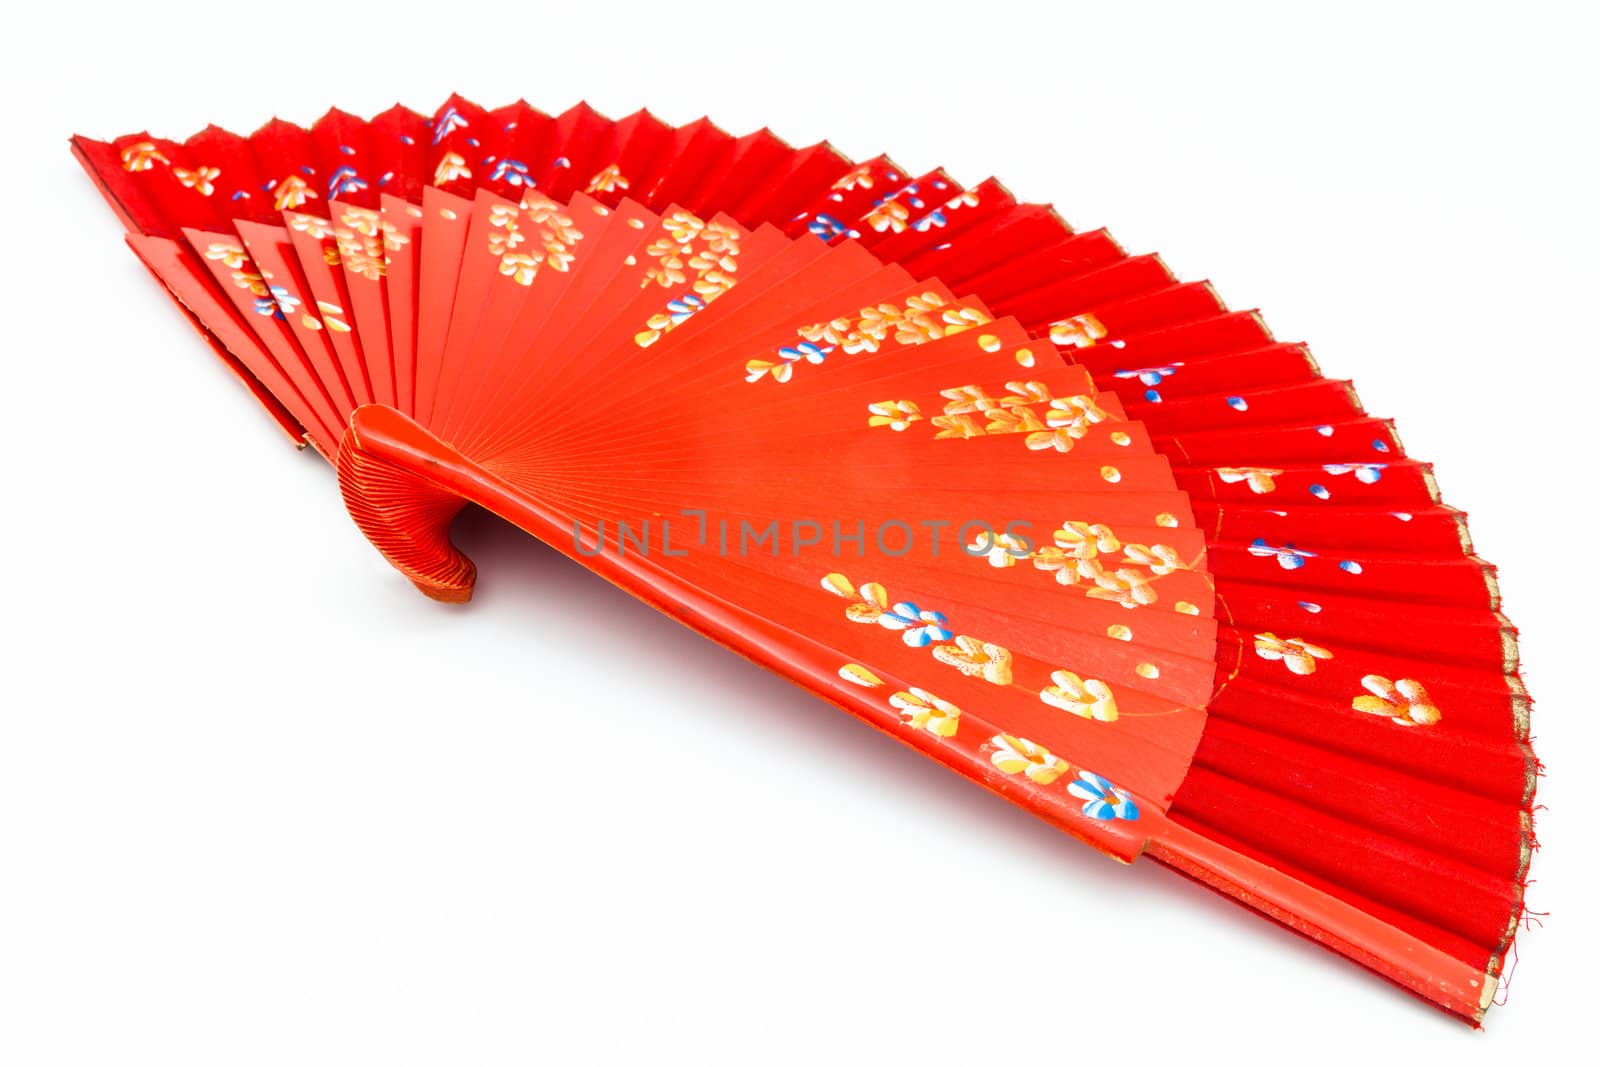 Red spanish fan on a white background